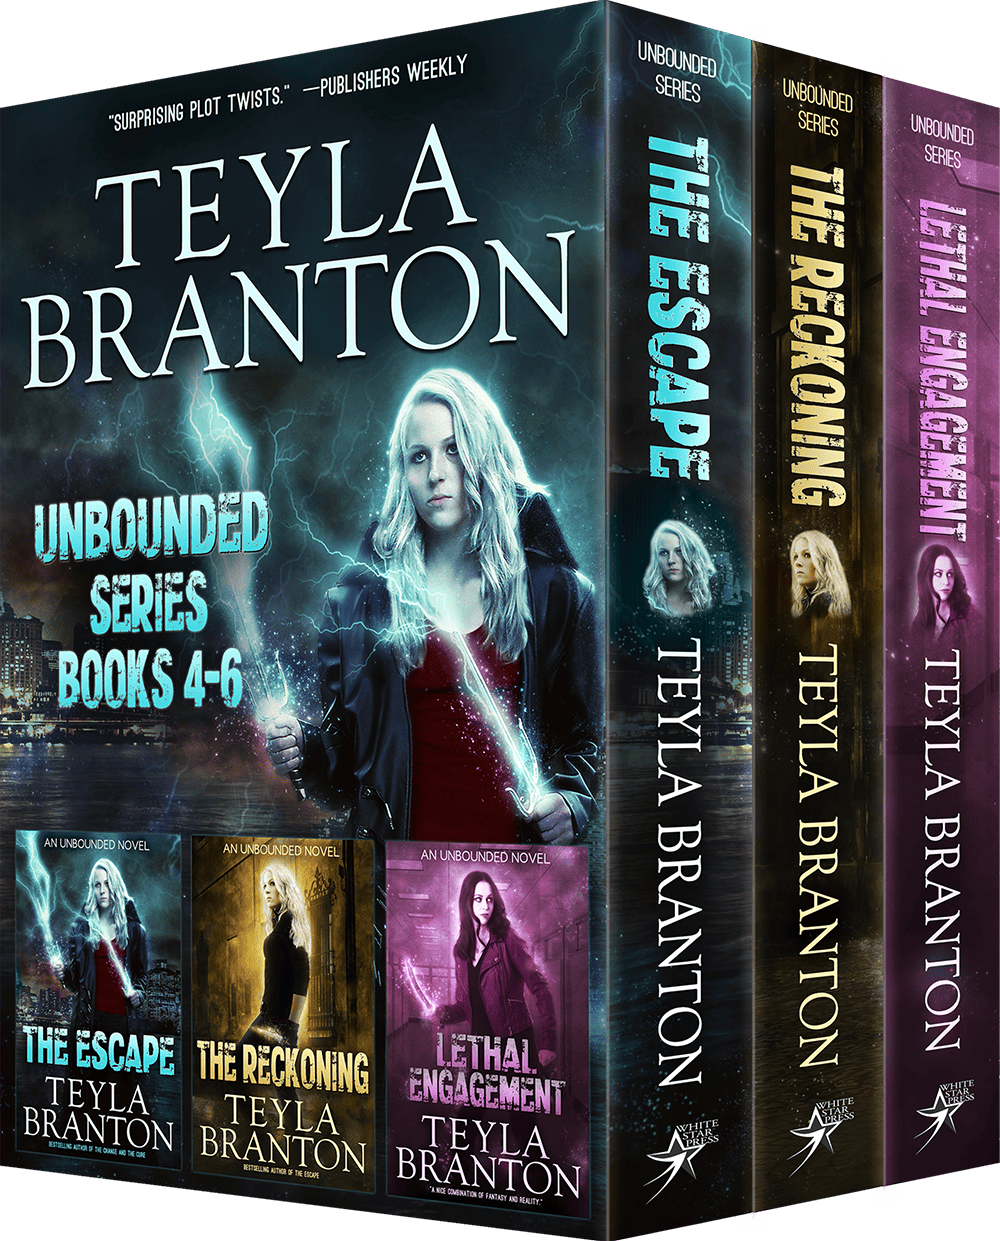 Unbounded Series Books 4-6 by Teyla Branton